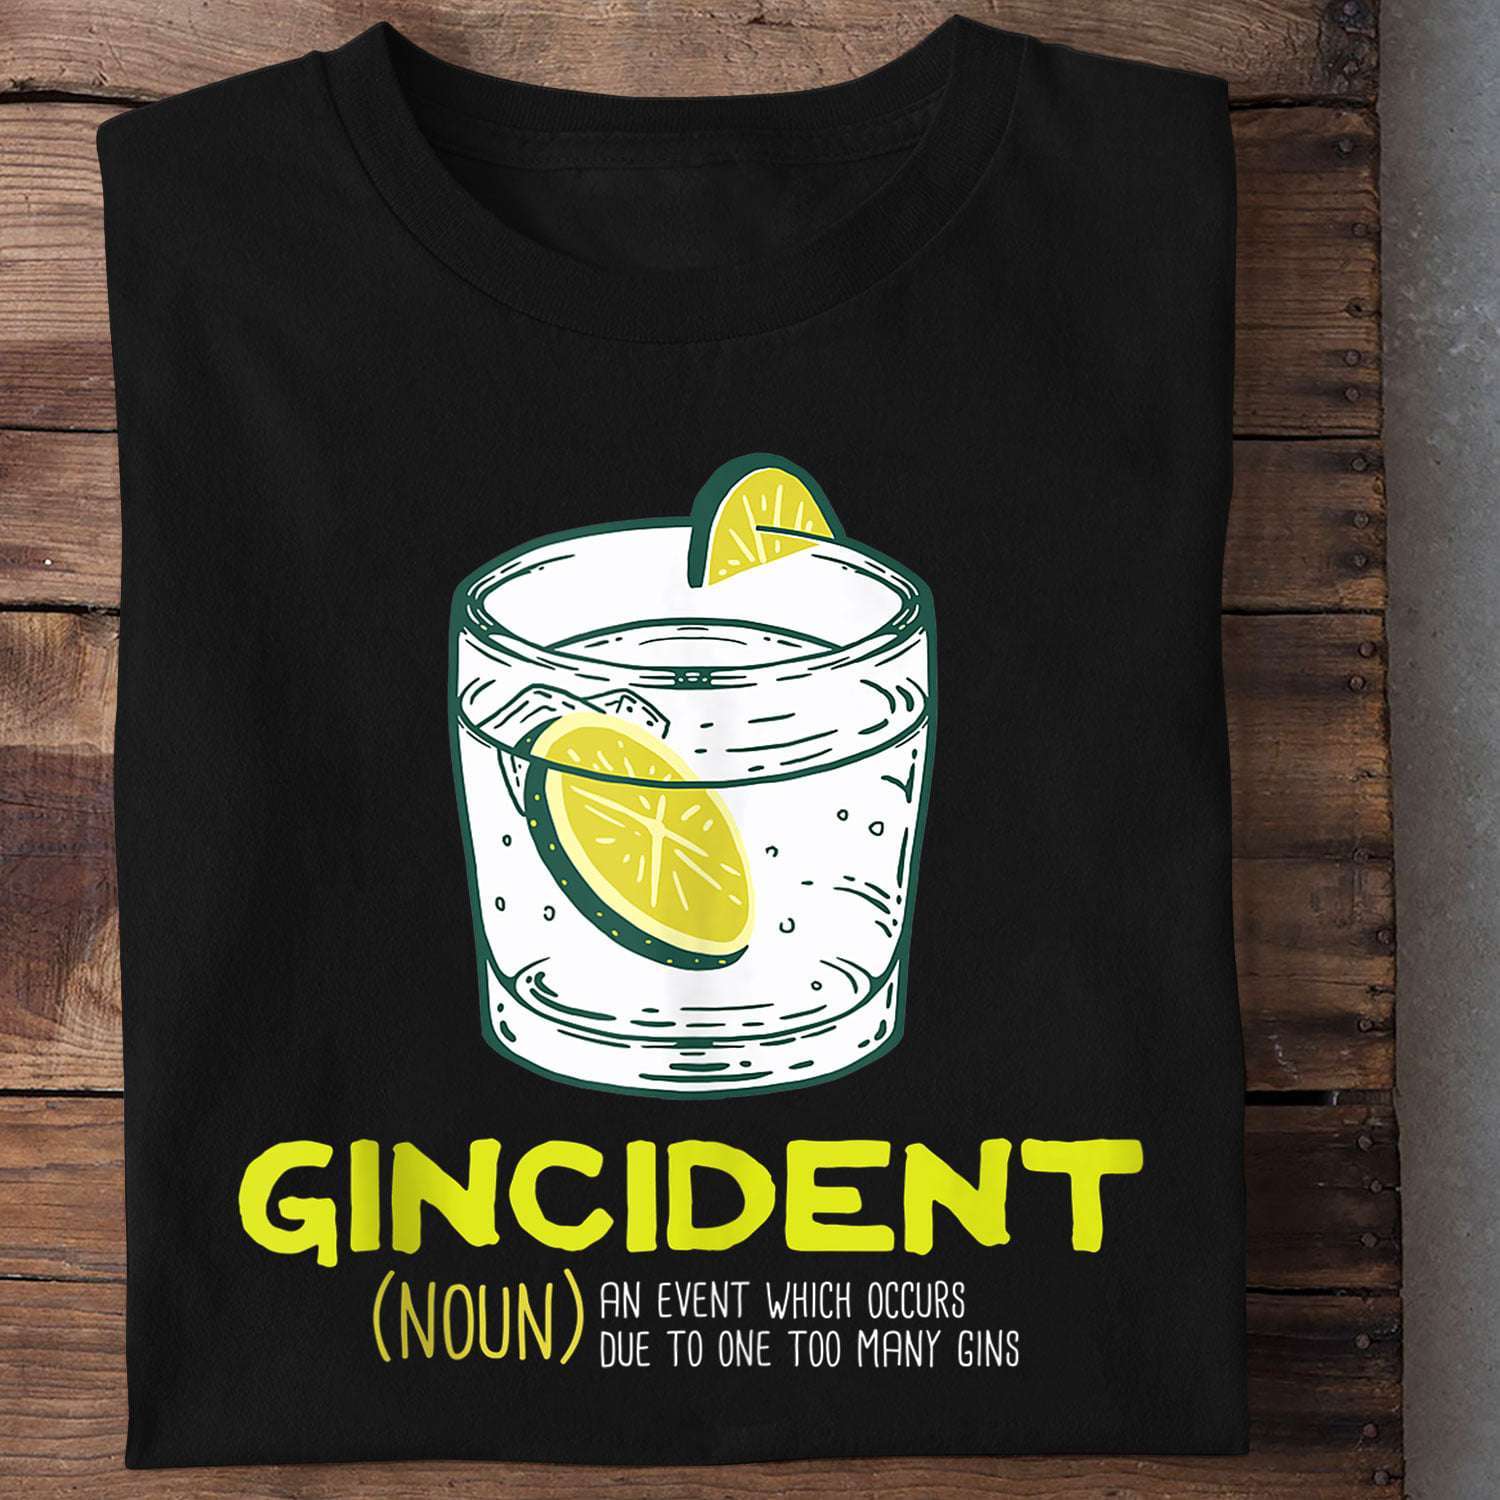 Gin Cocktails - Gincident an event which occurs due to one too many gins